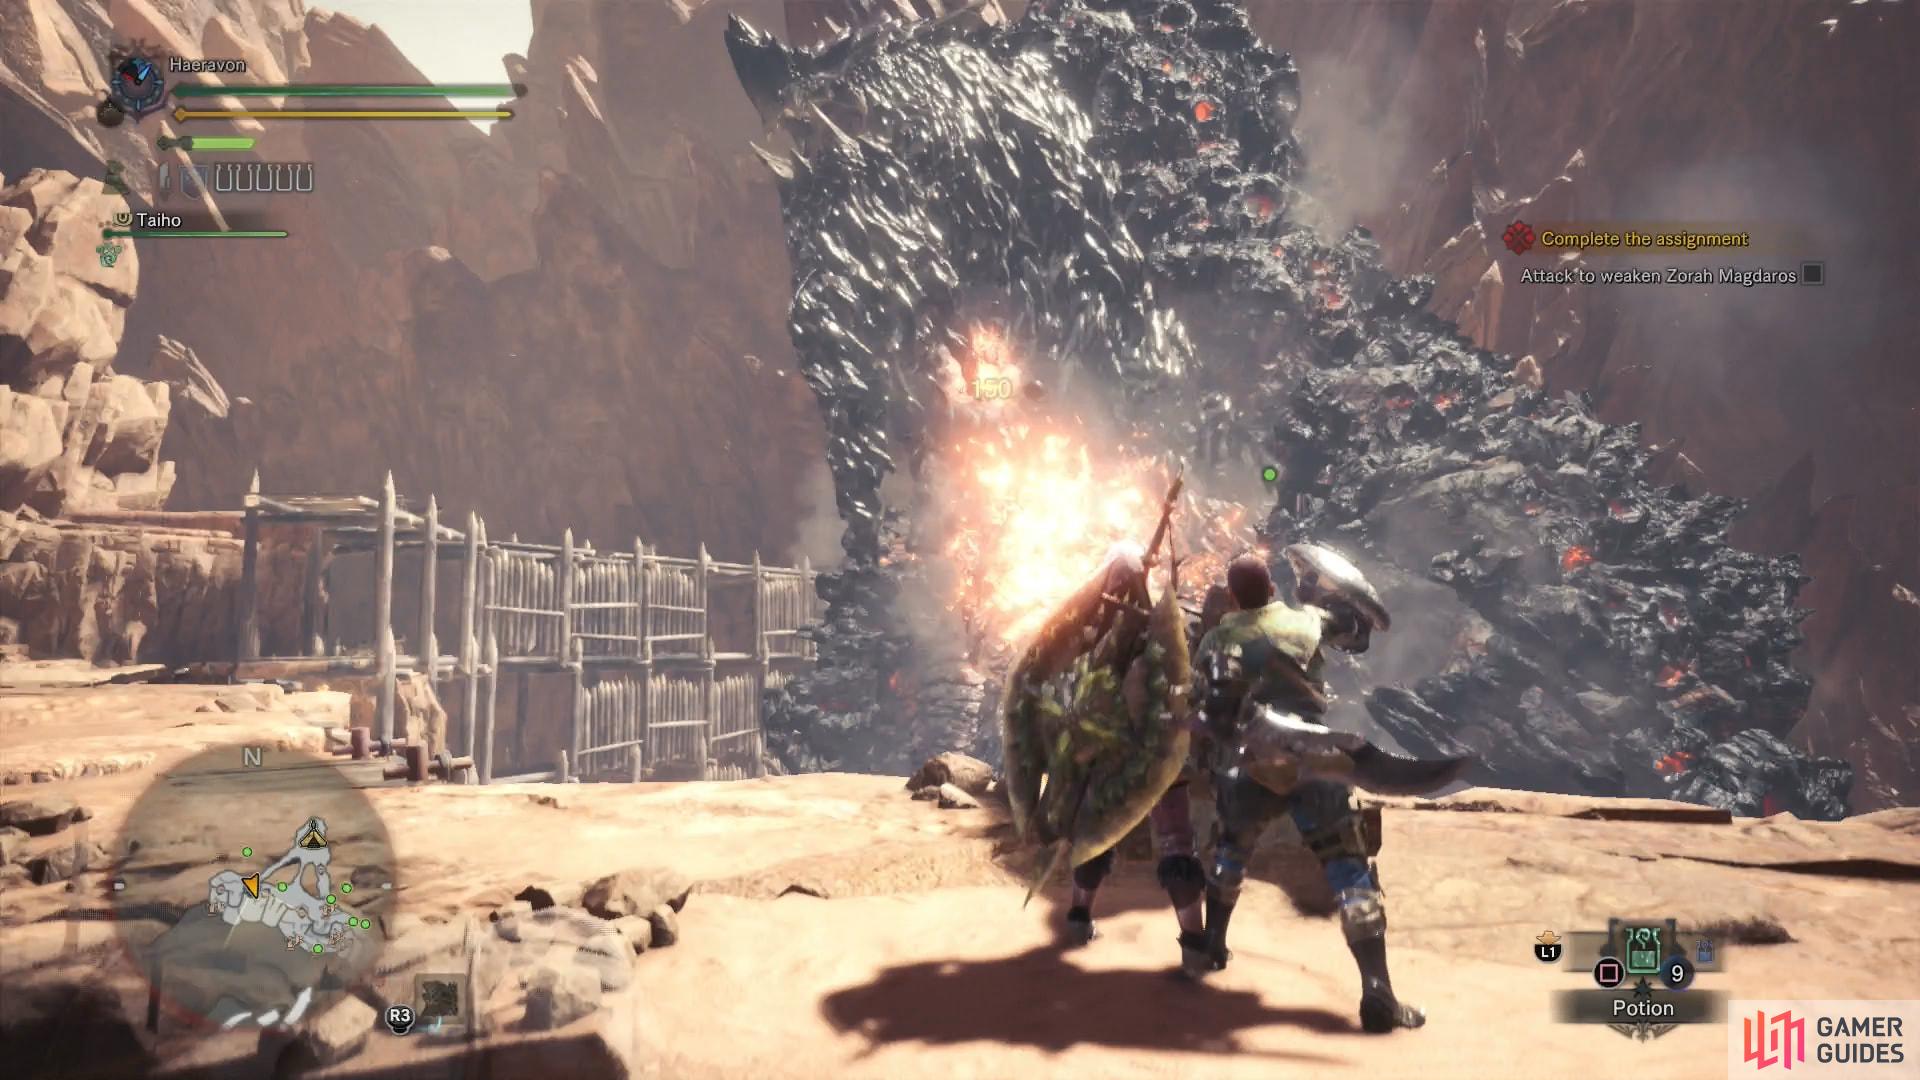 Load the various cannons with up to fire cannon balls at a time, then fire them in a volley to deal big damage to Zorah Magdaros